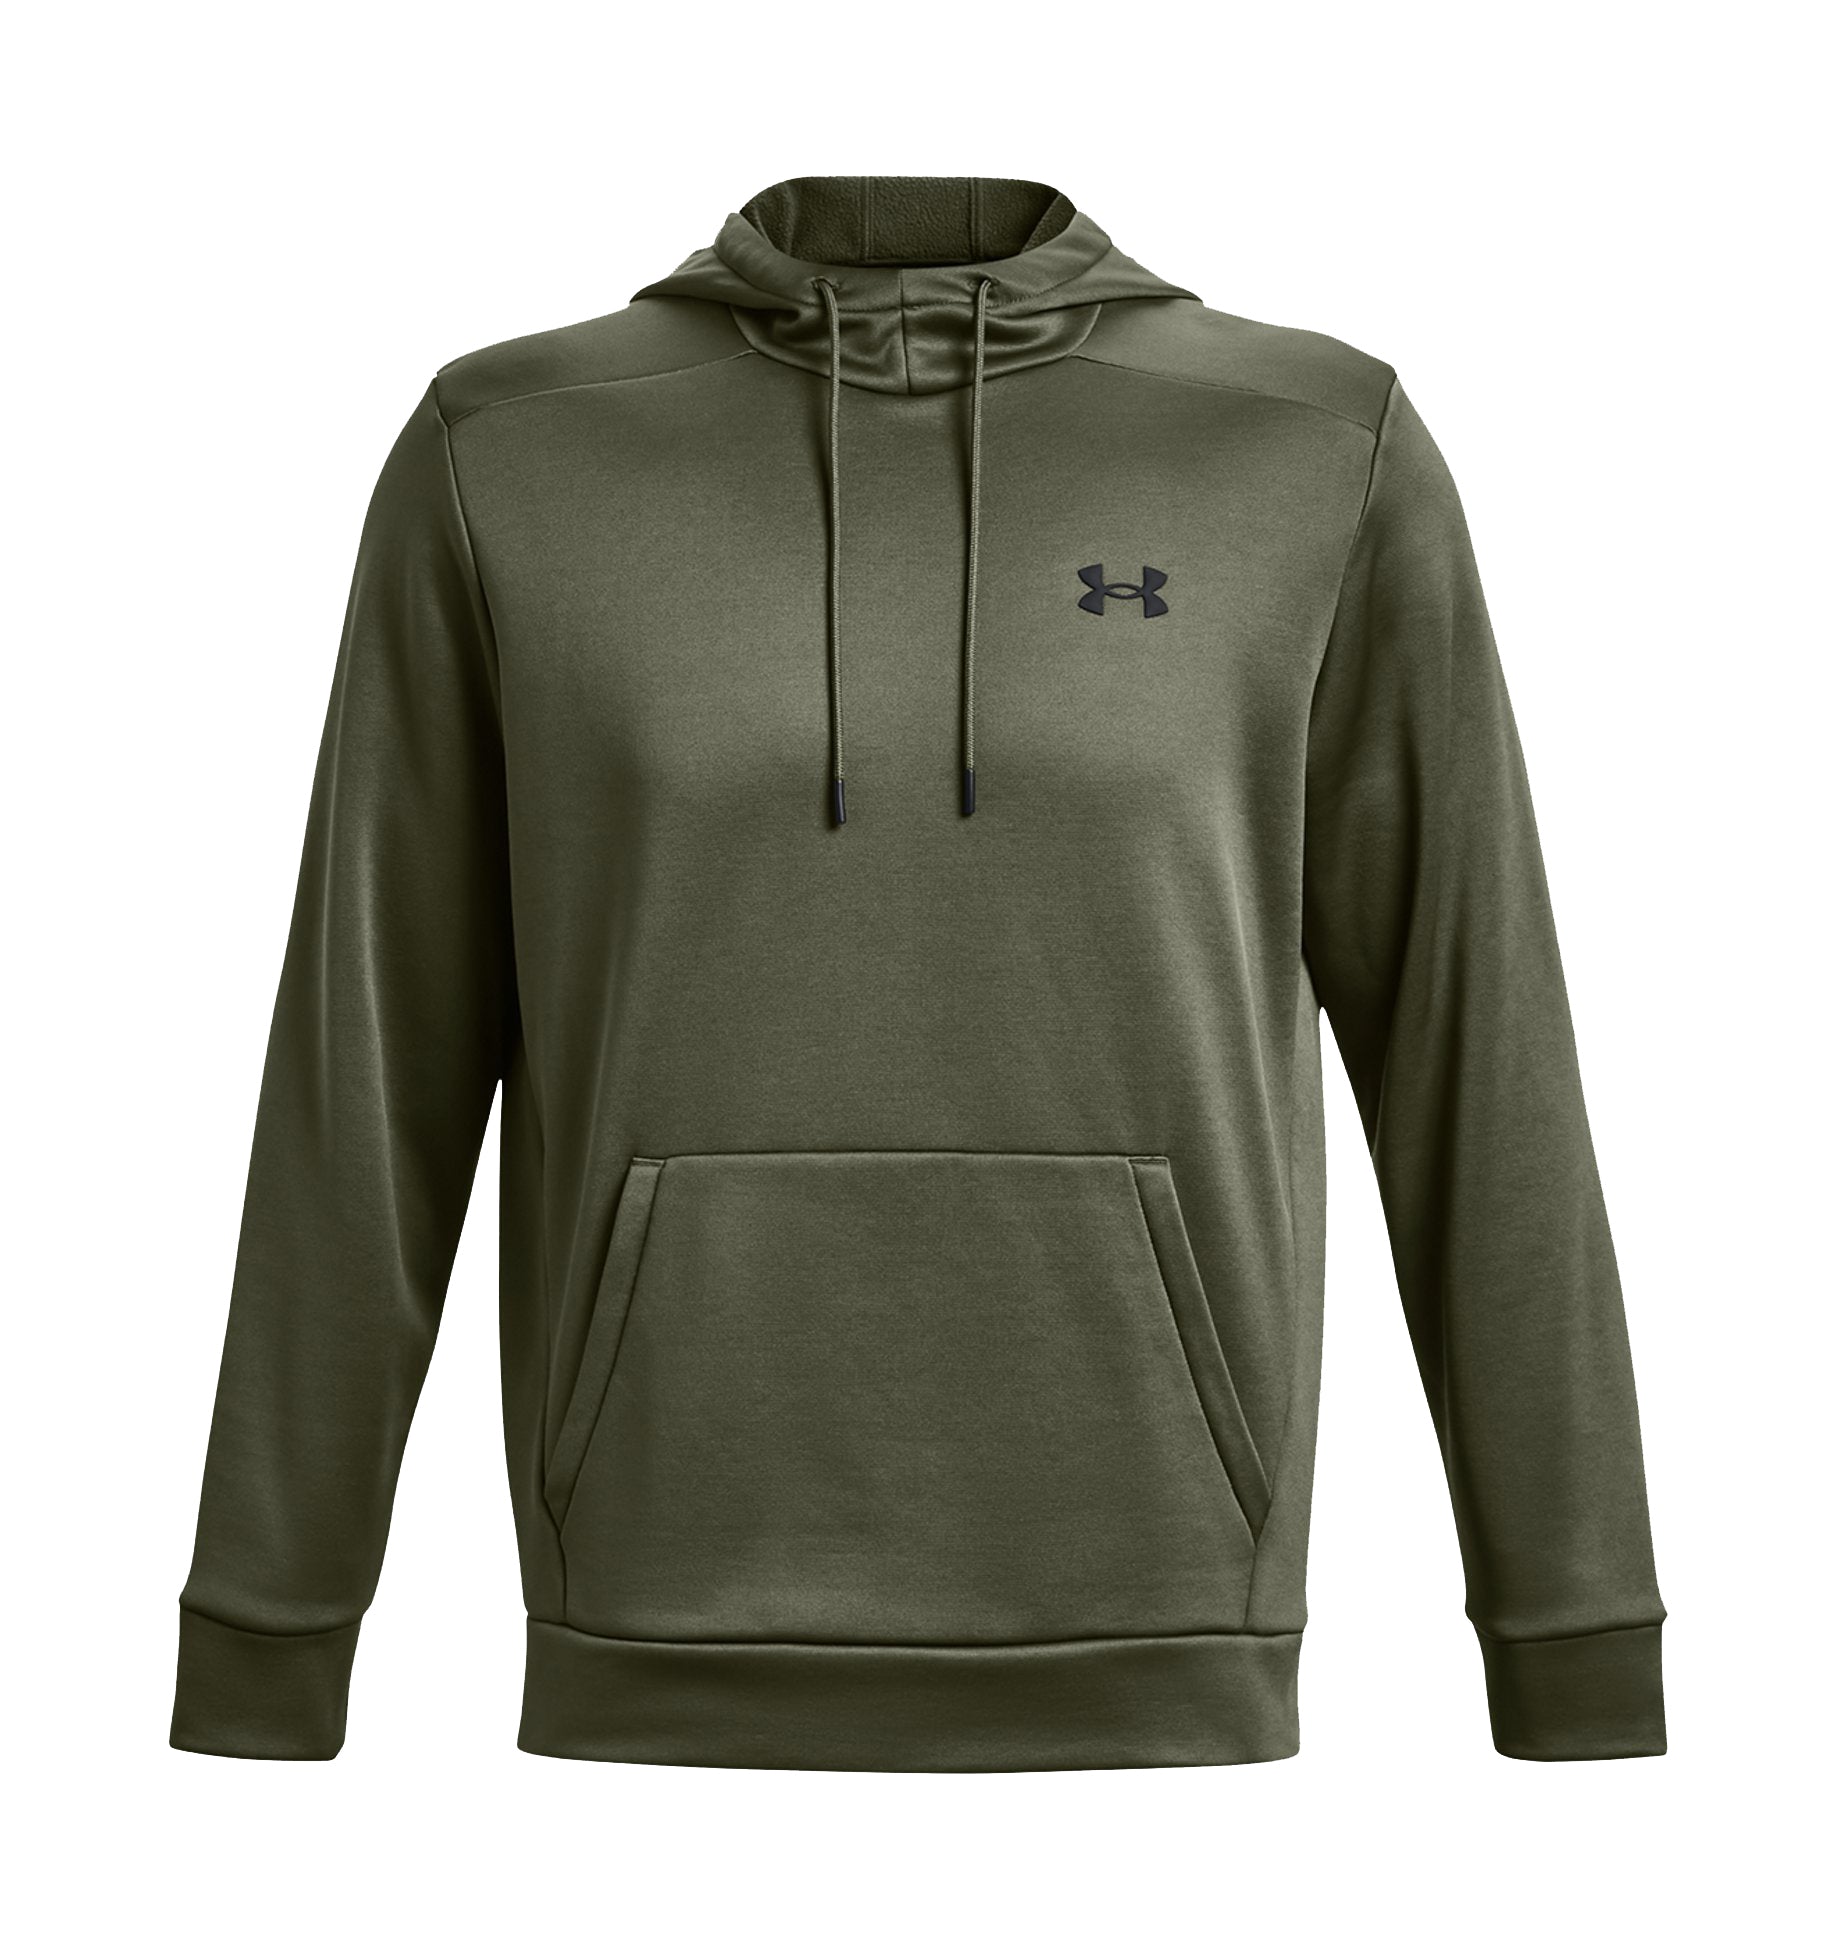 Under Armour Brow Tine ColdGear Infrared Jacket - Presleys Outdoors